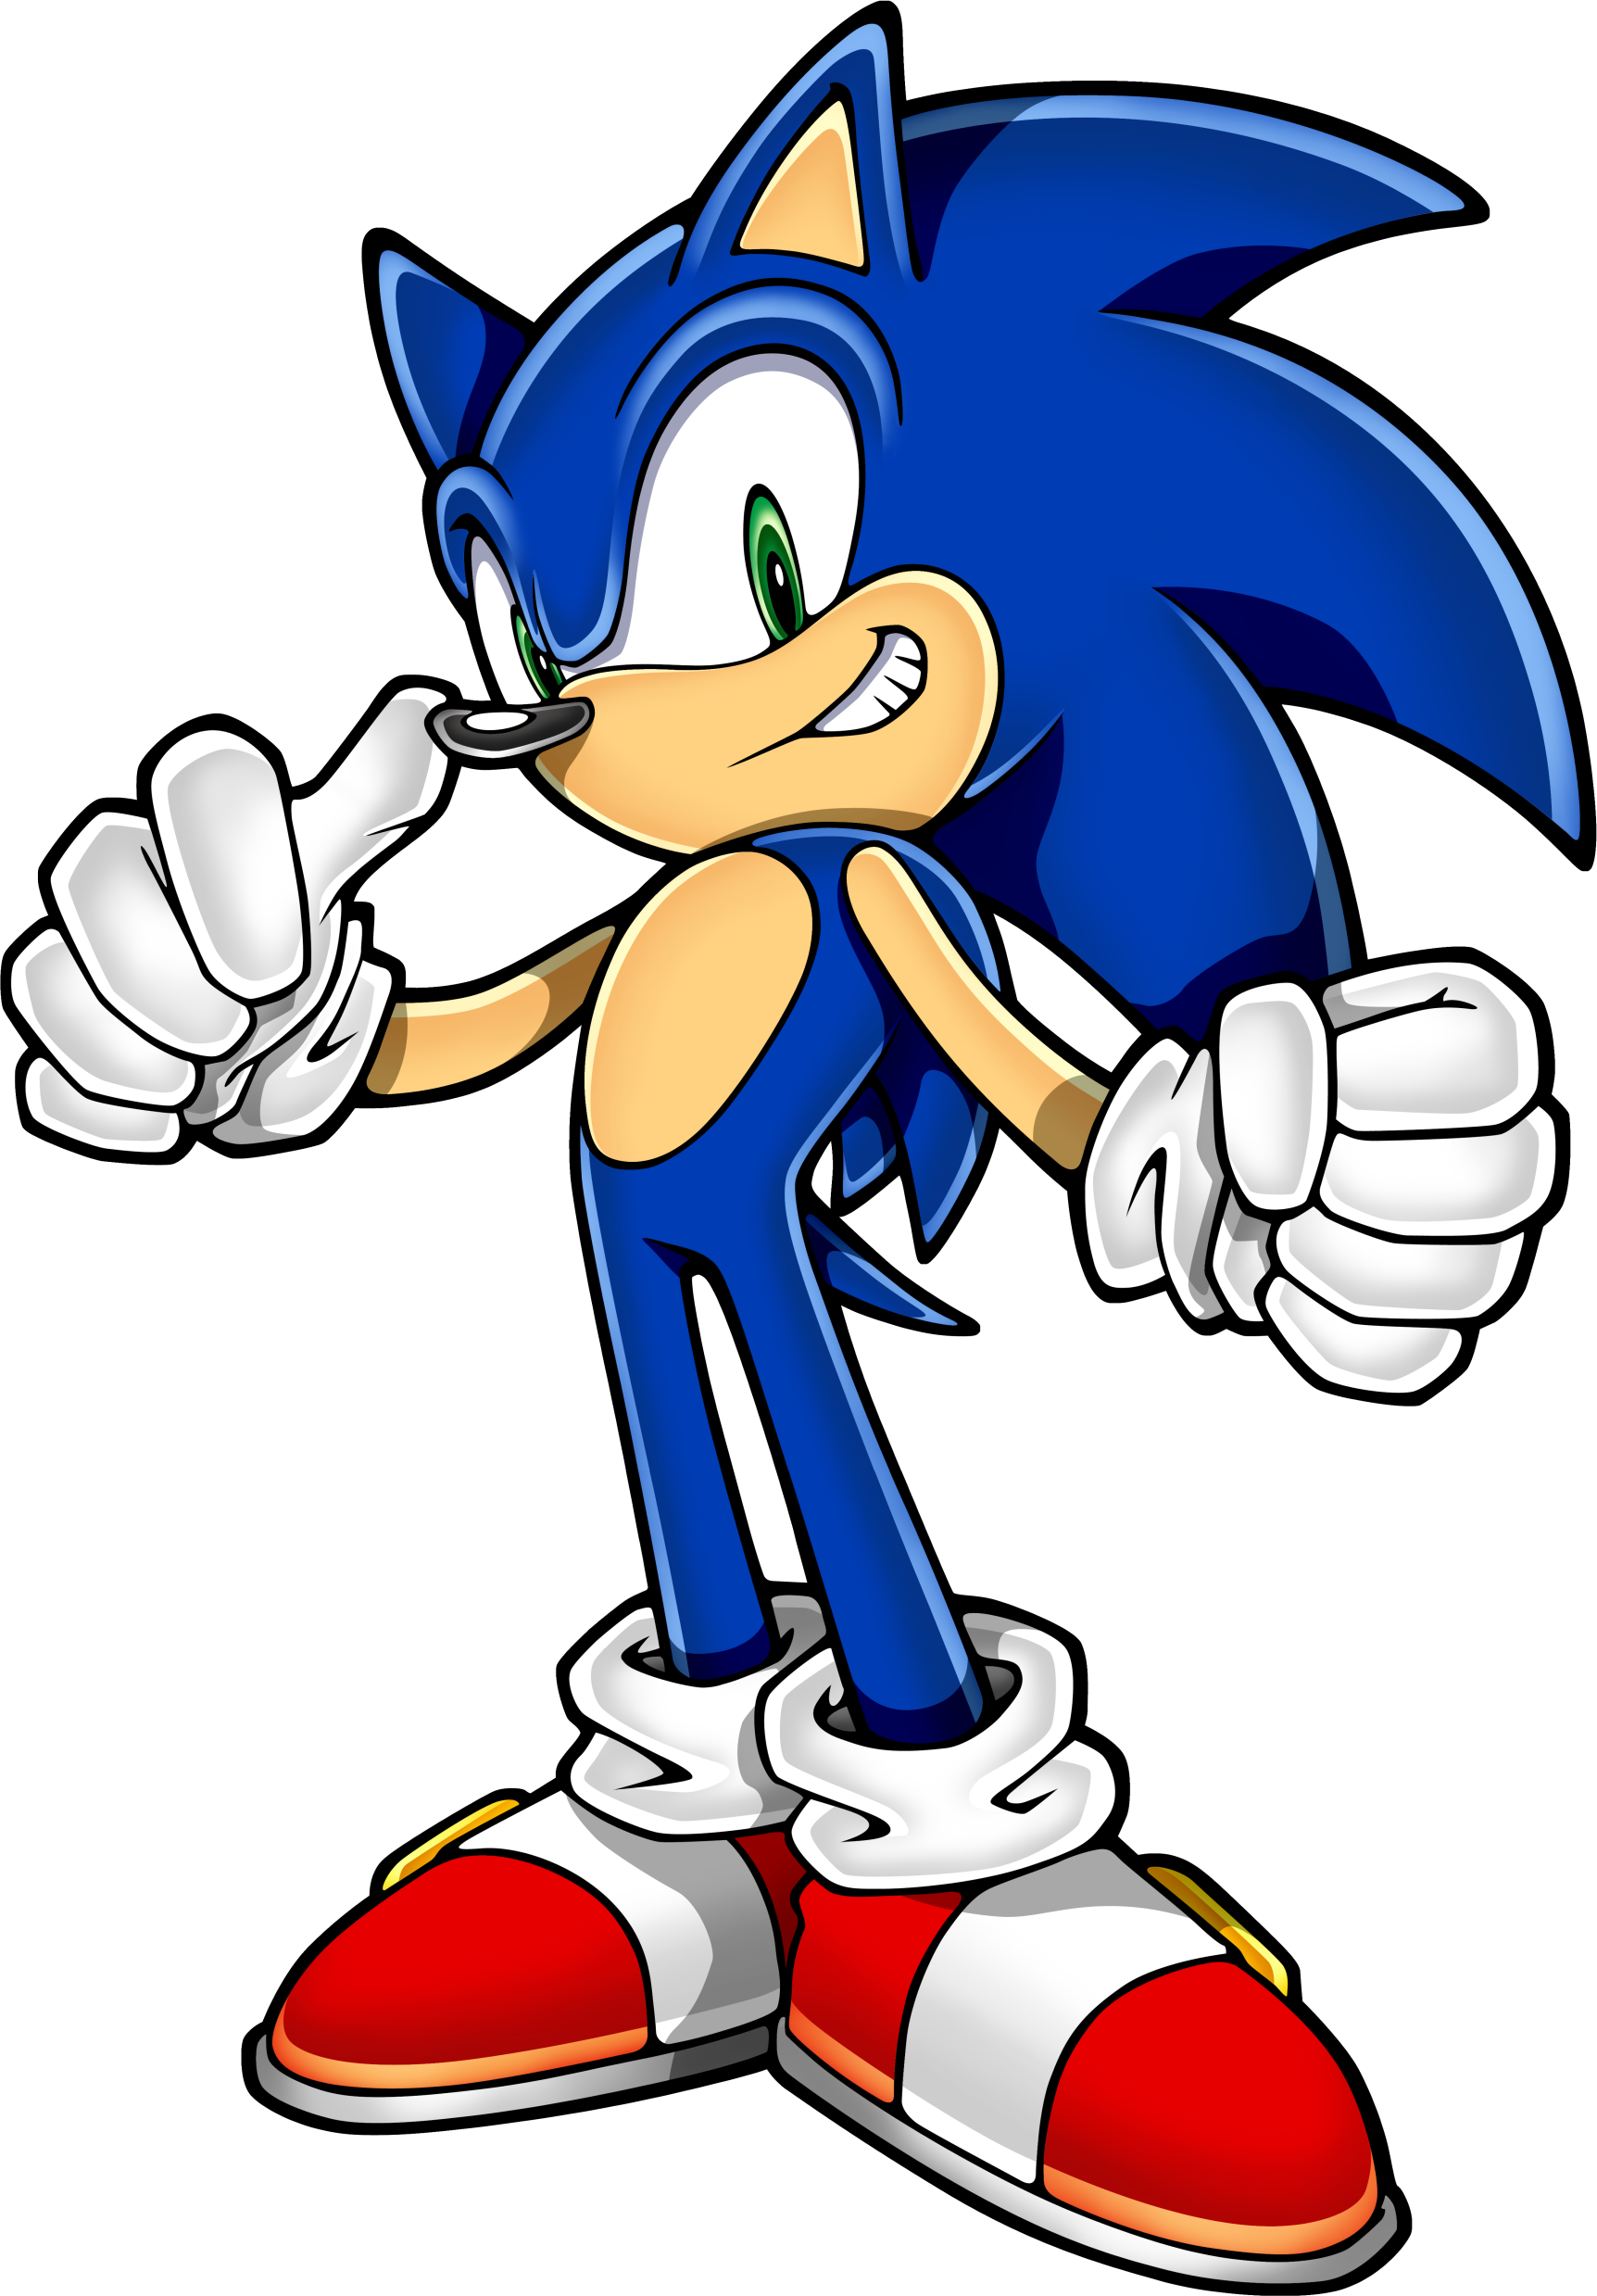 File:Sonic The Hedgehog.png